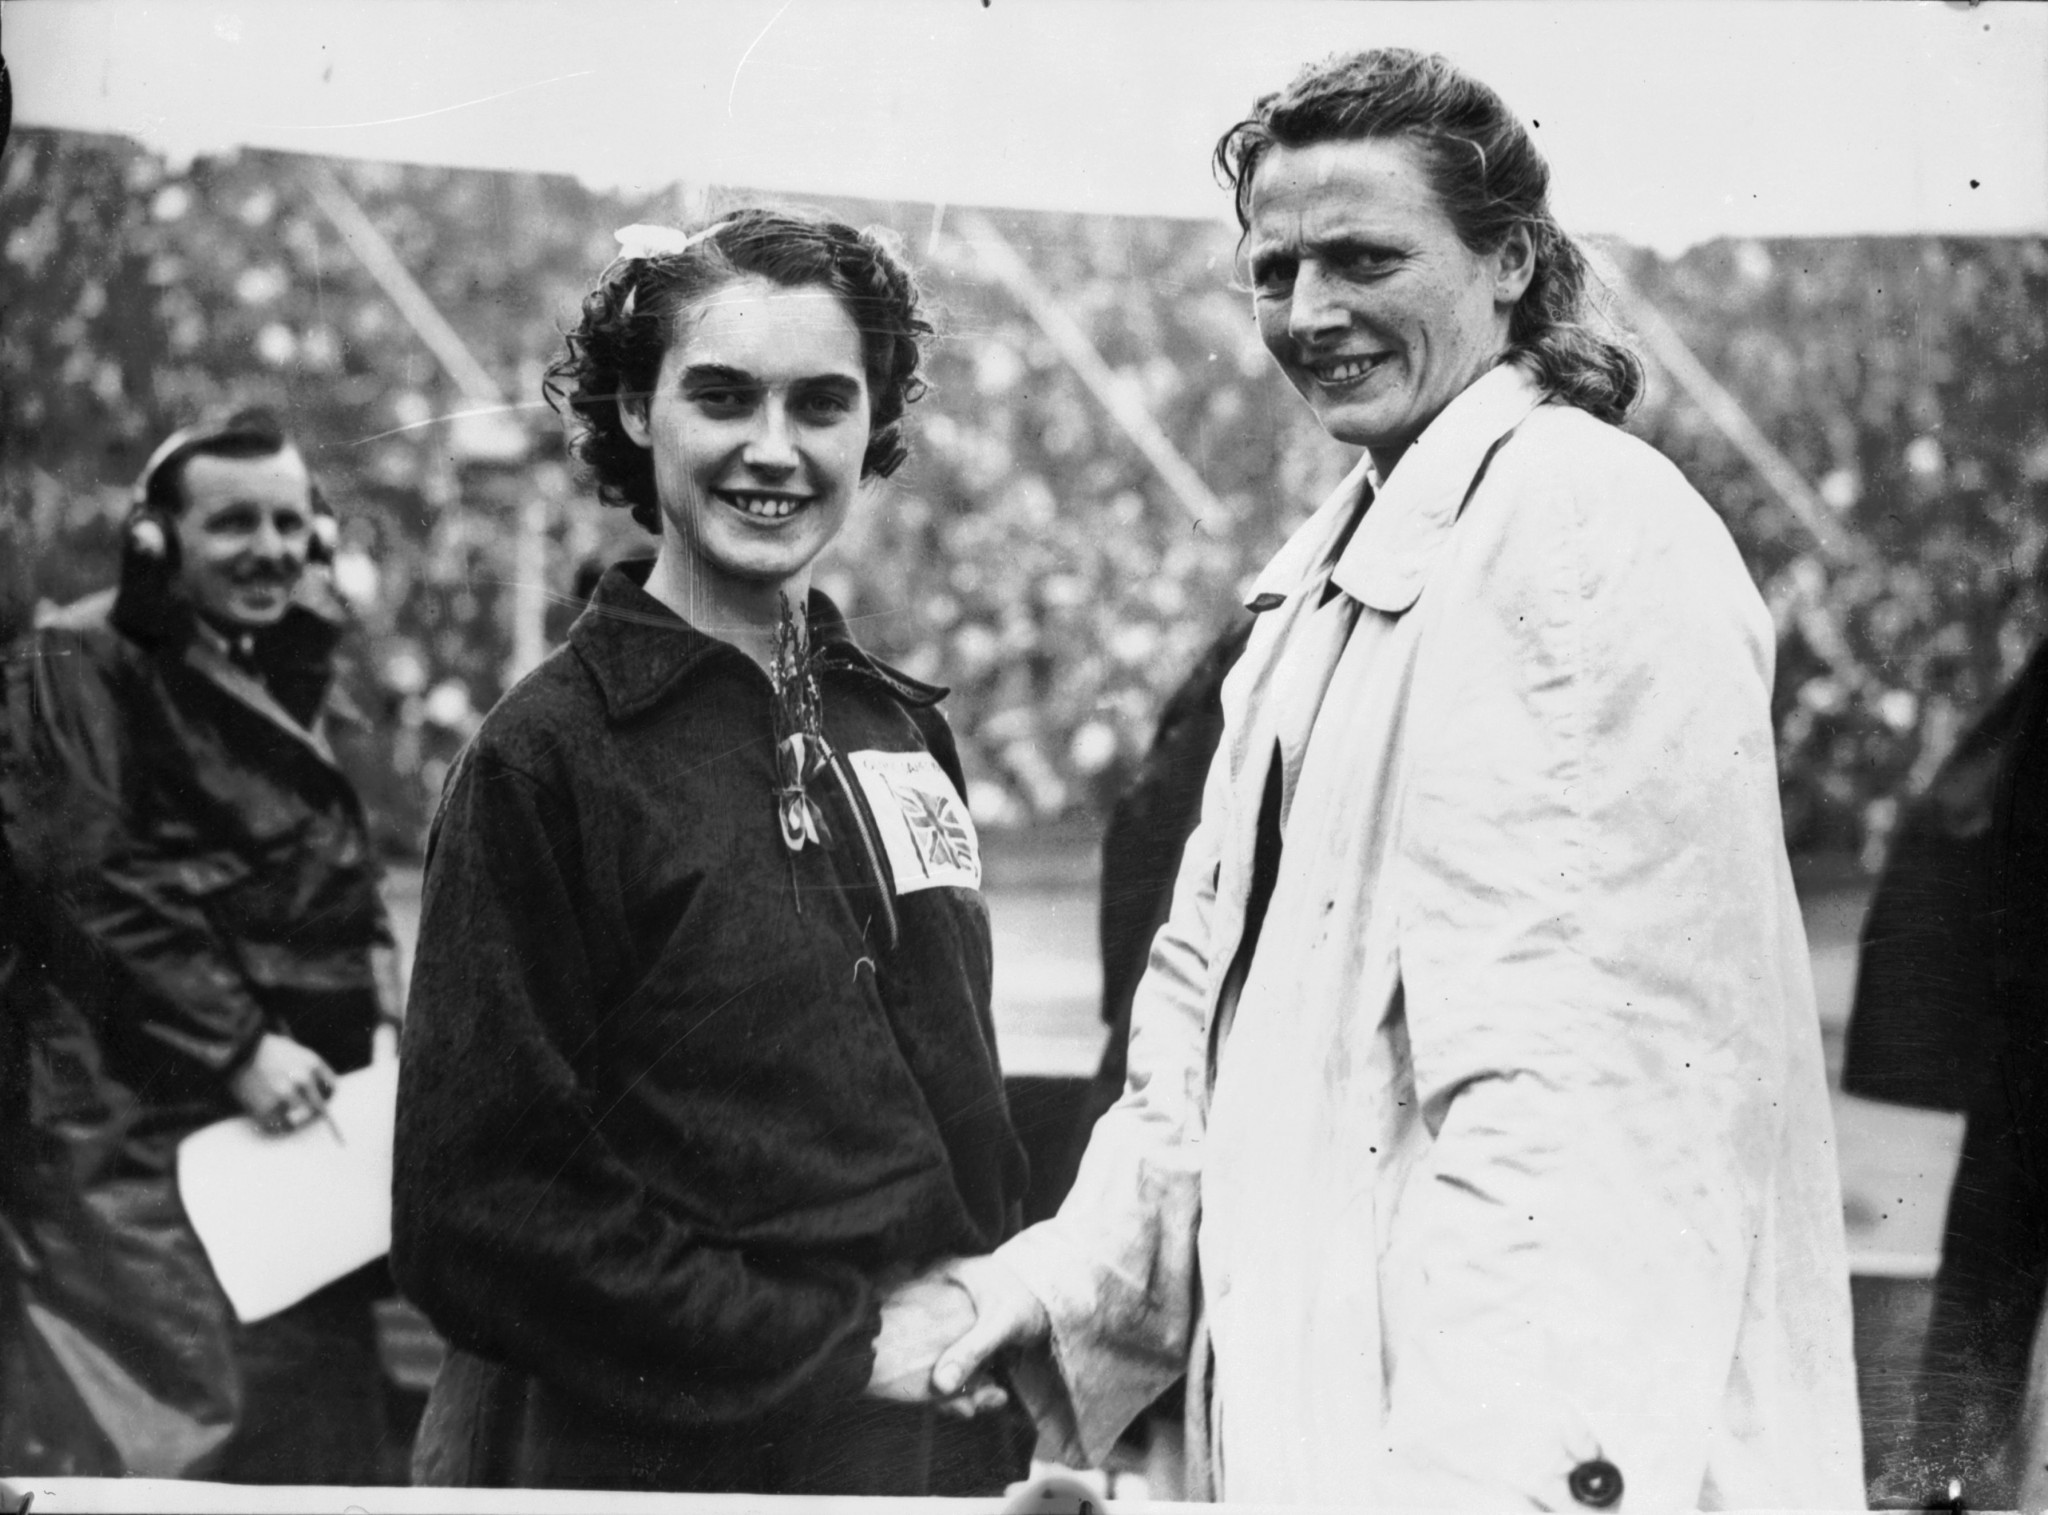 London 1948 Olympic 100m silver medallist dies at age of 94